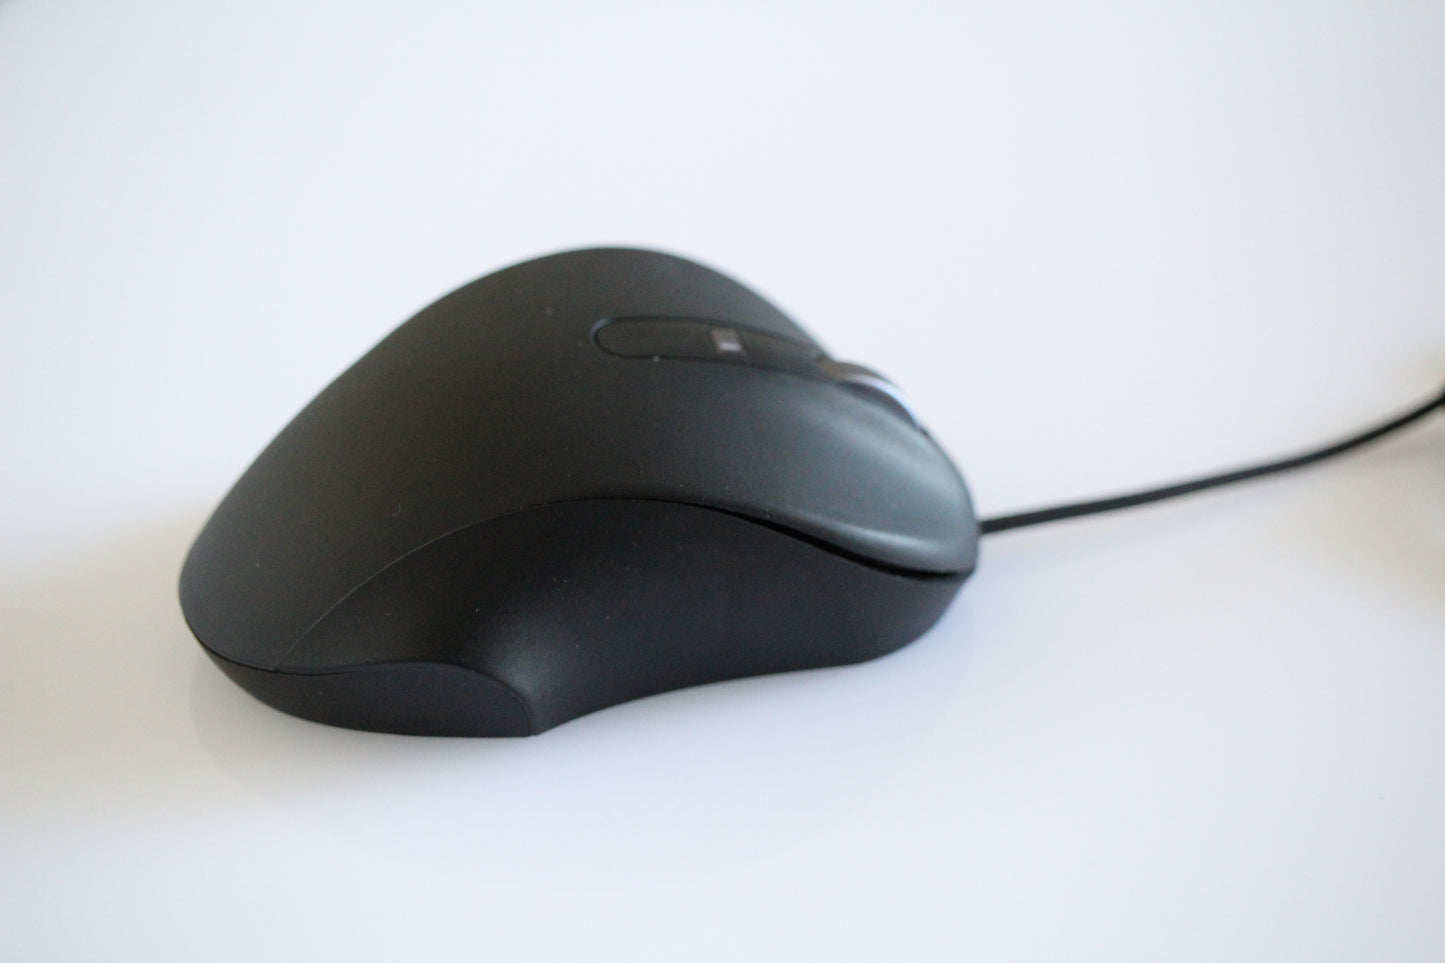 Wired PBT Mouse - Black